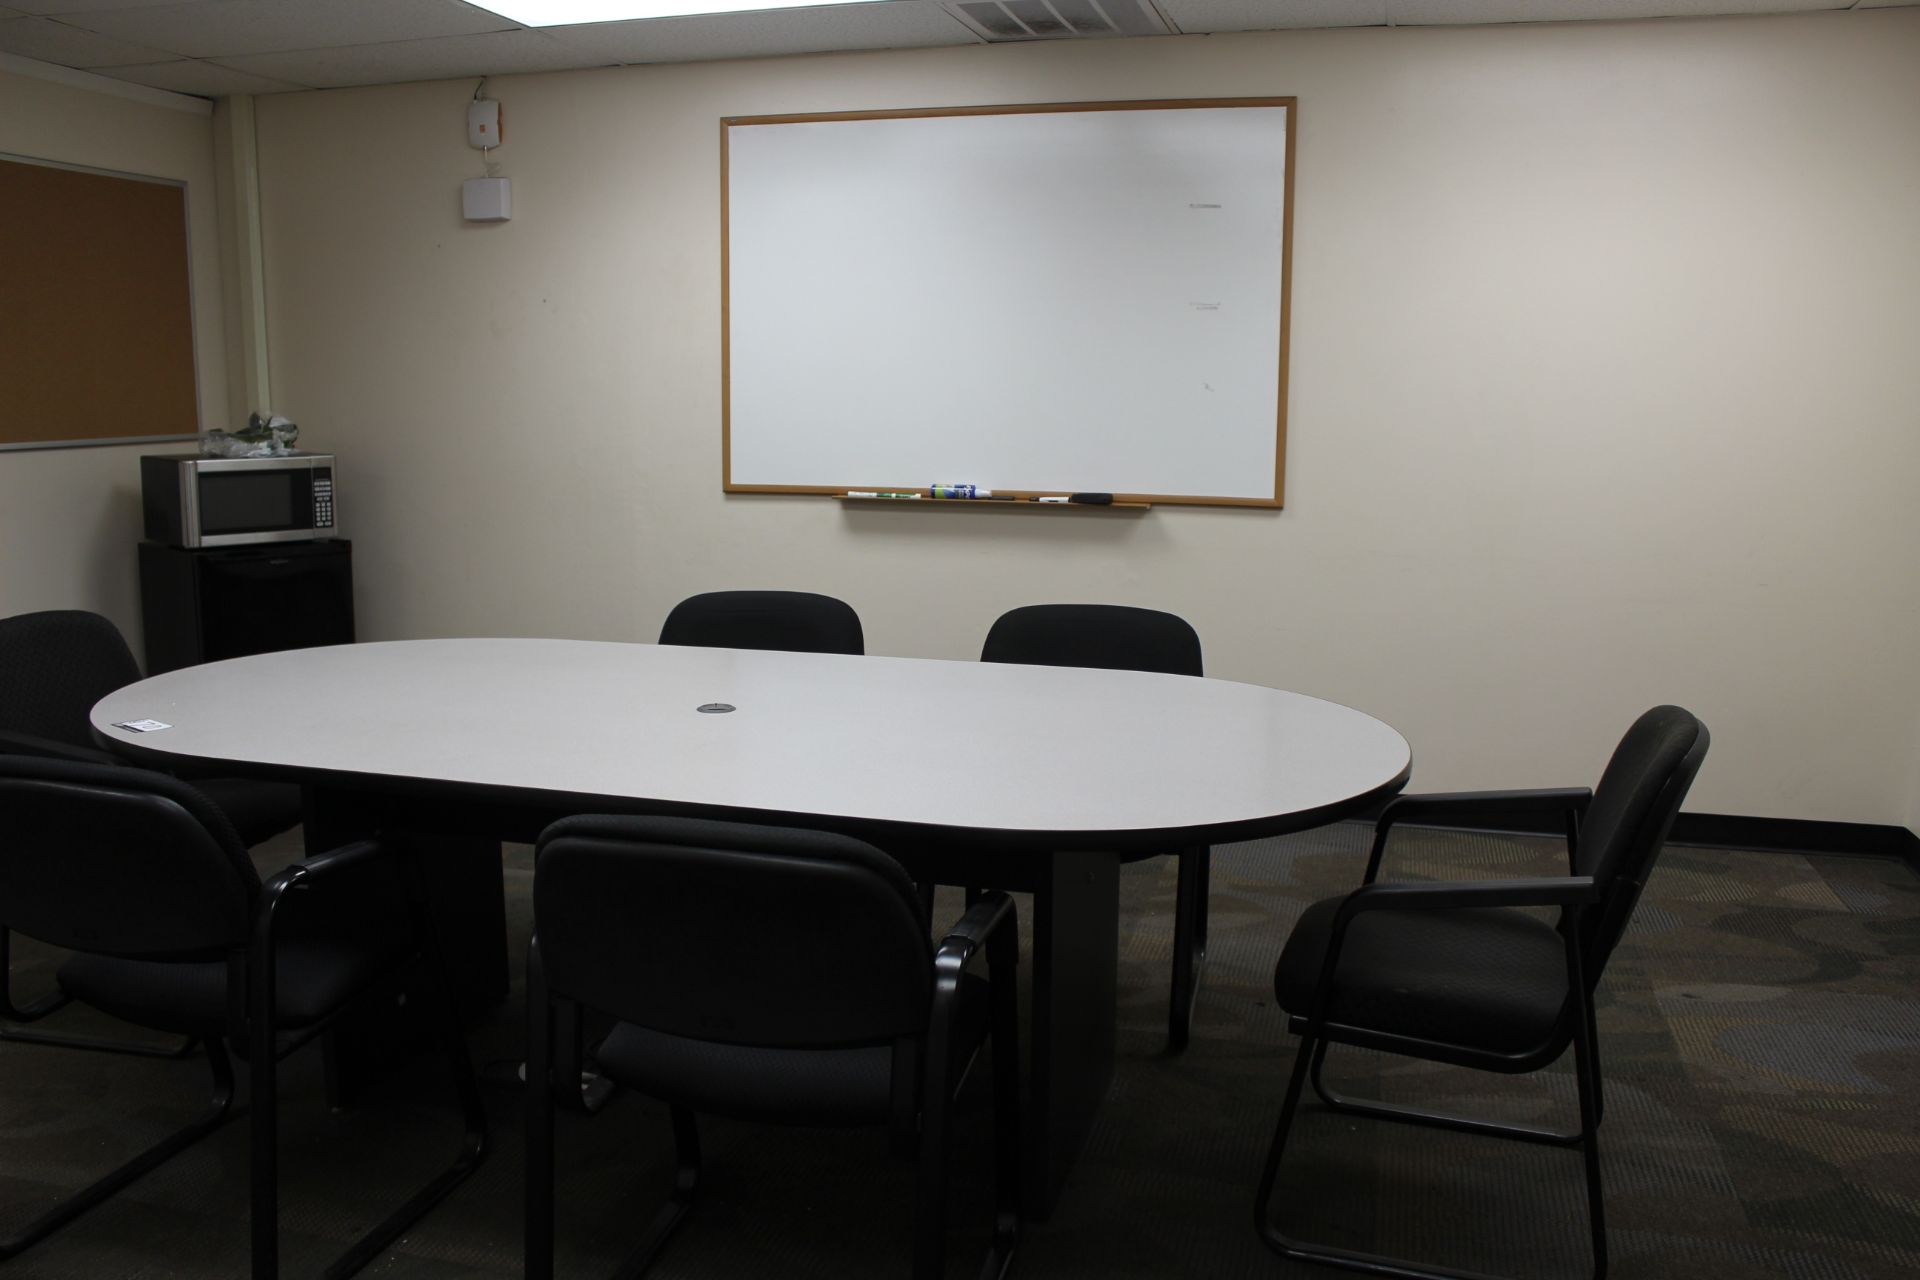 CONFERENCE TABLE, CHAIRS, AND 2 WHITE BOARDS - Image 4 of 4